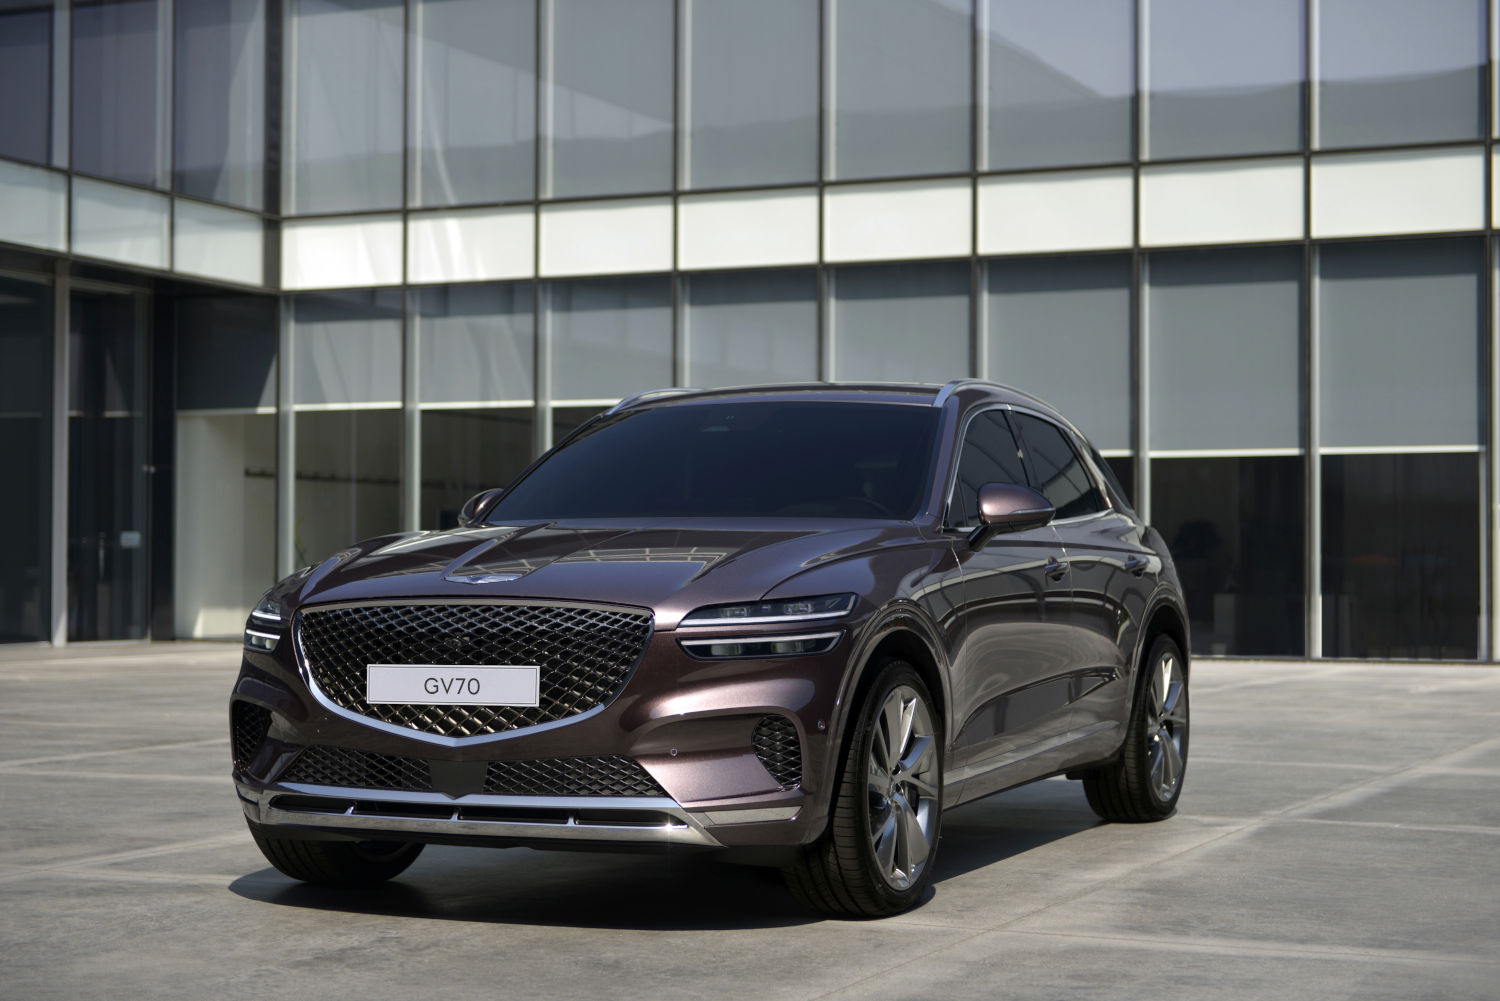 This 2023 Genesis GV70 is one of the best SUVs